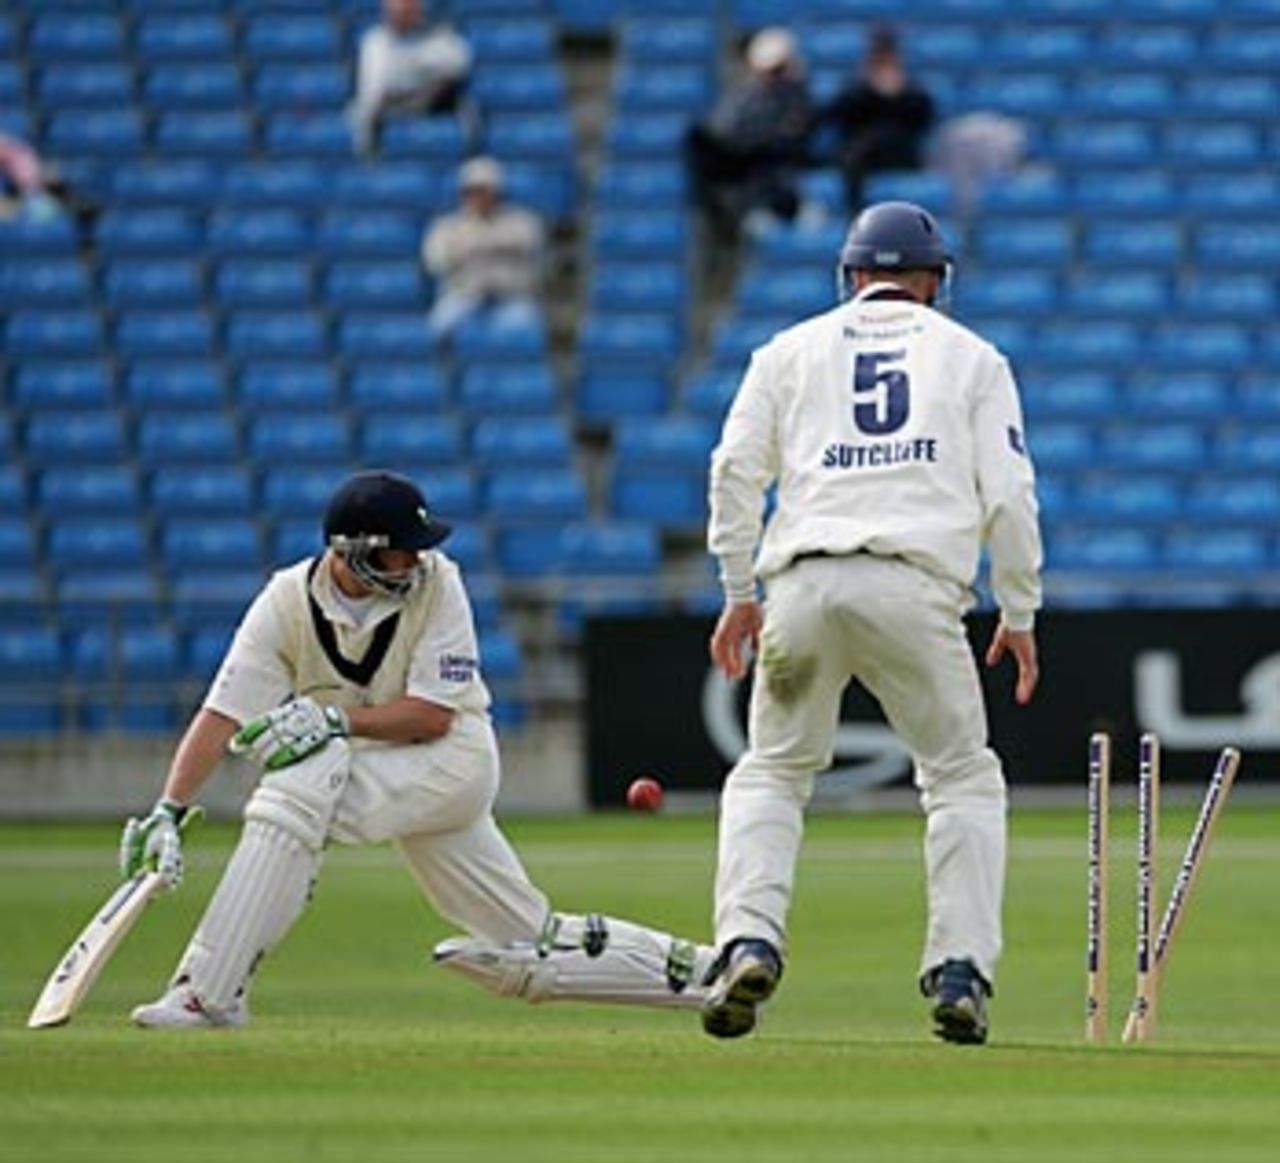 Gerard Brophy is bowled around his legs by Gary Keedy, Yorkshire v Lancashire, Headingley, May 18, 2006